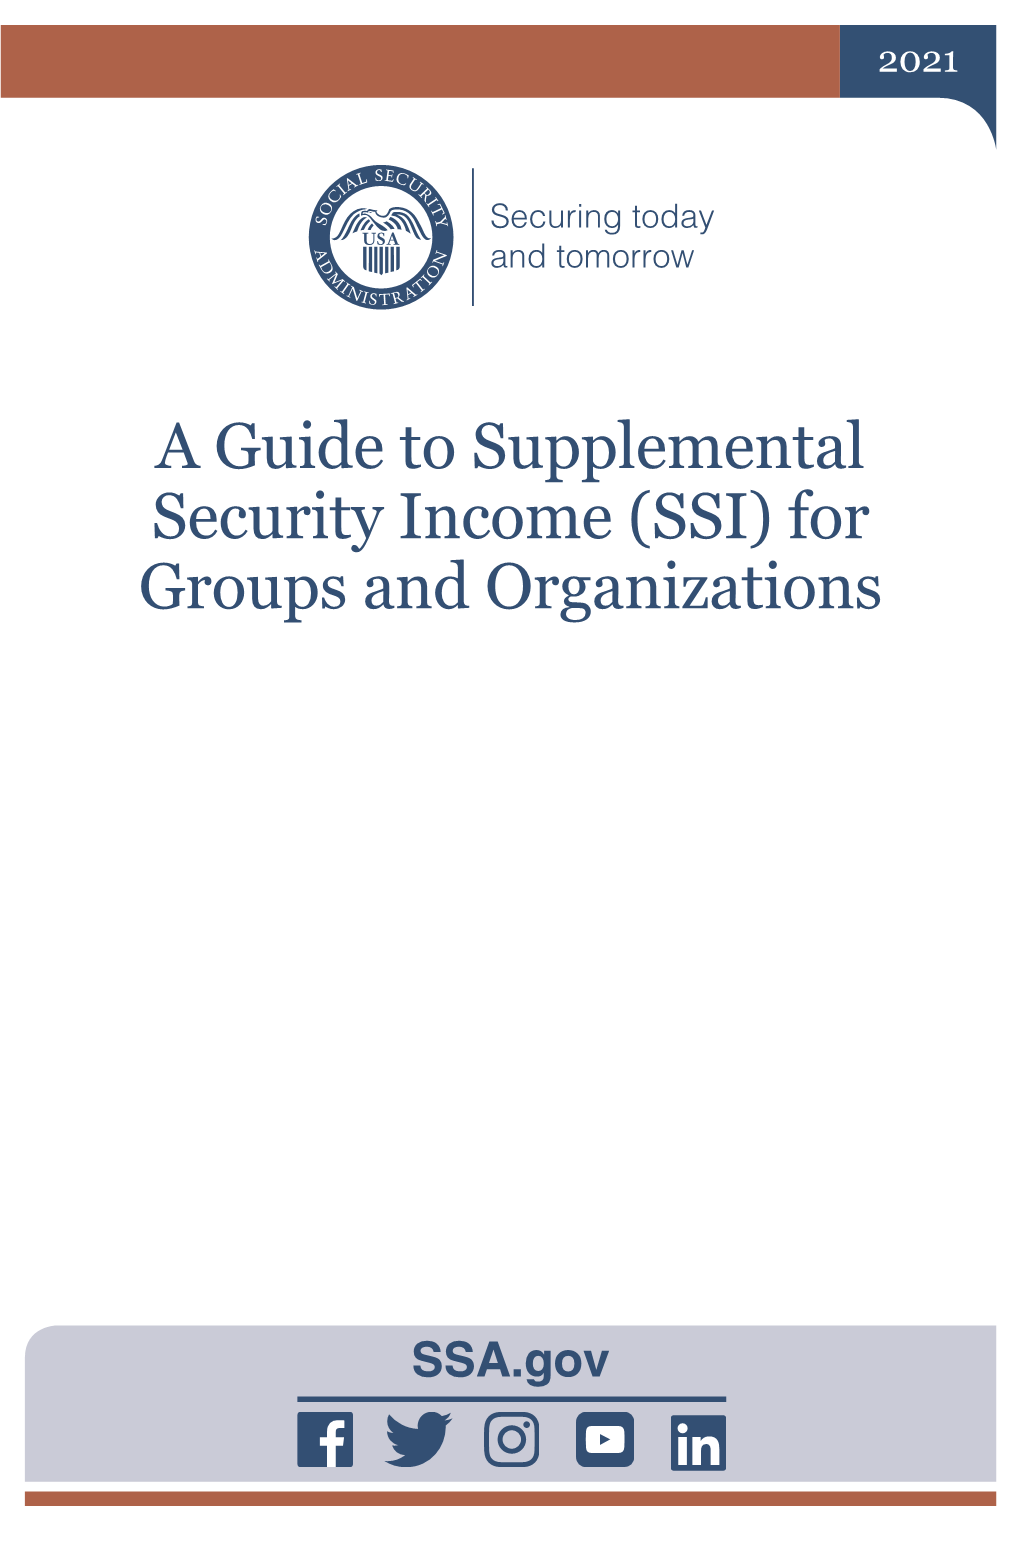 A Guide to Supplemental Security Income (SSI) for Groups and Organizations 2020